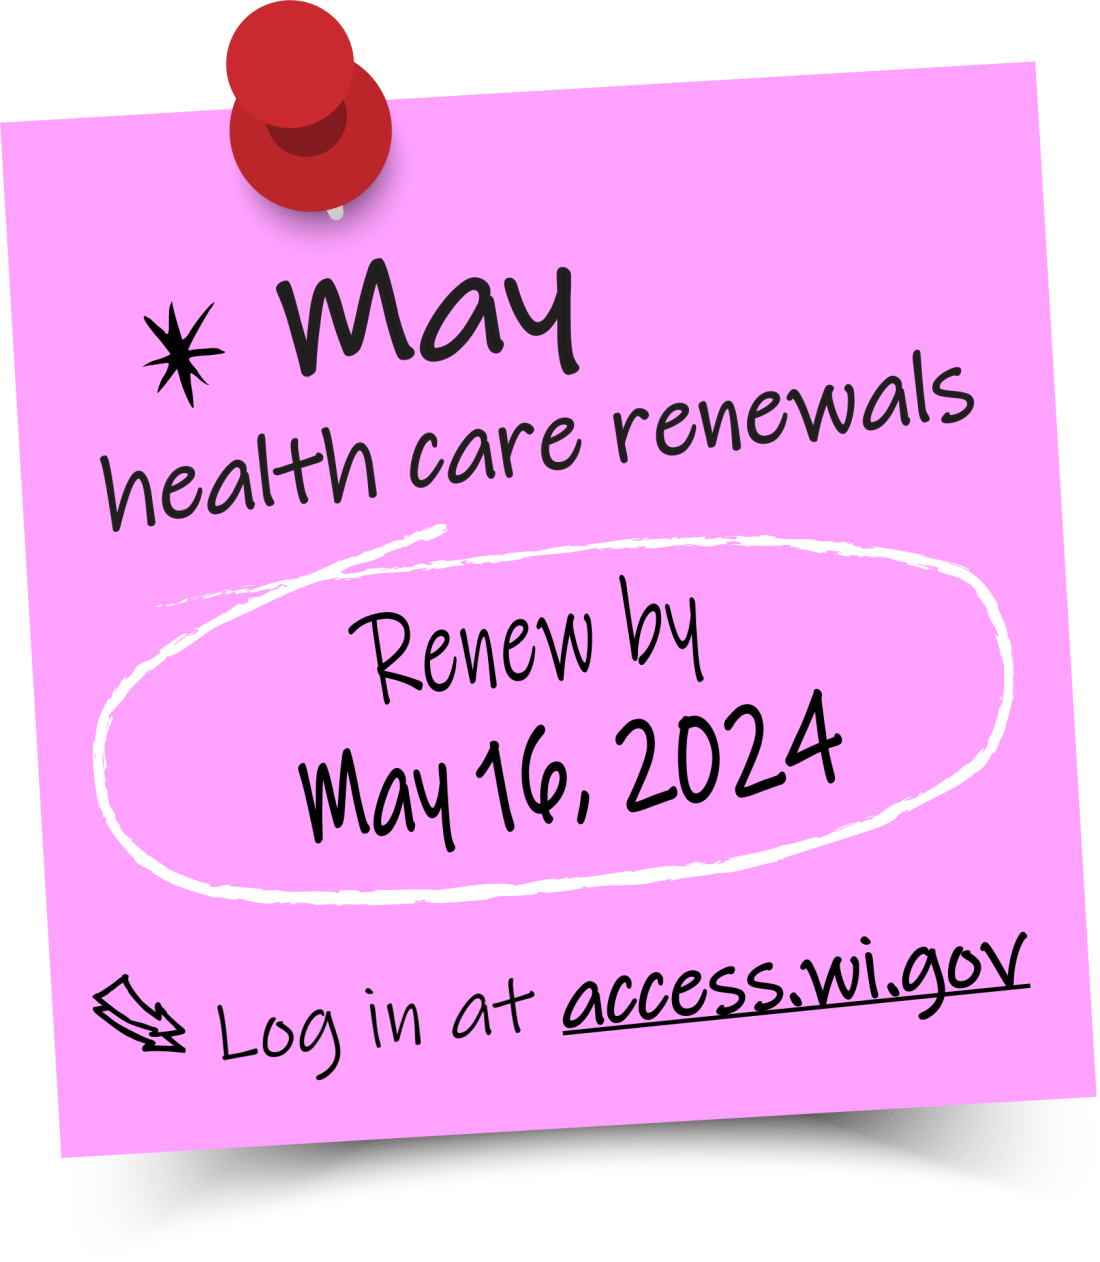 May health care renewals - Renew by May 16, 2024. Log in at access.wi.gov